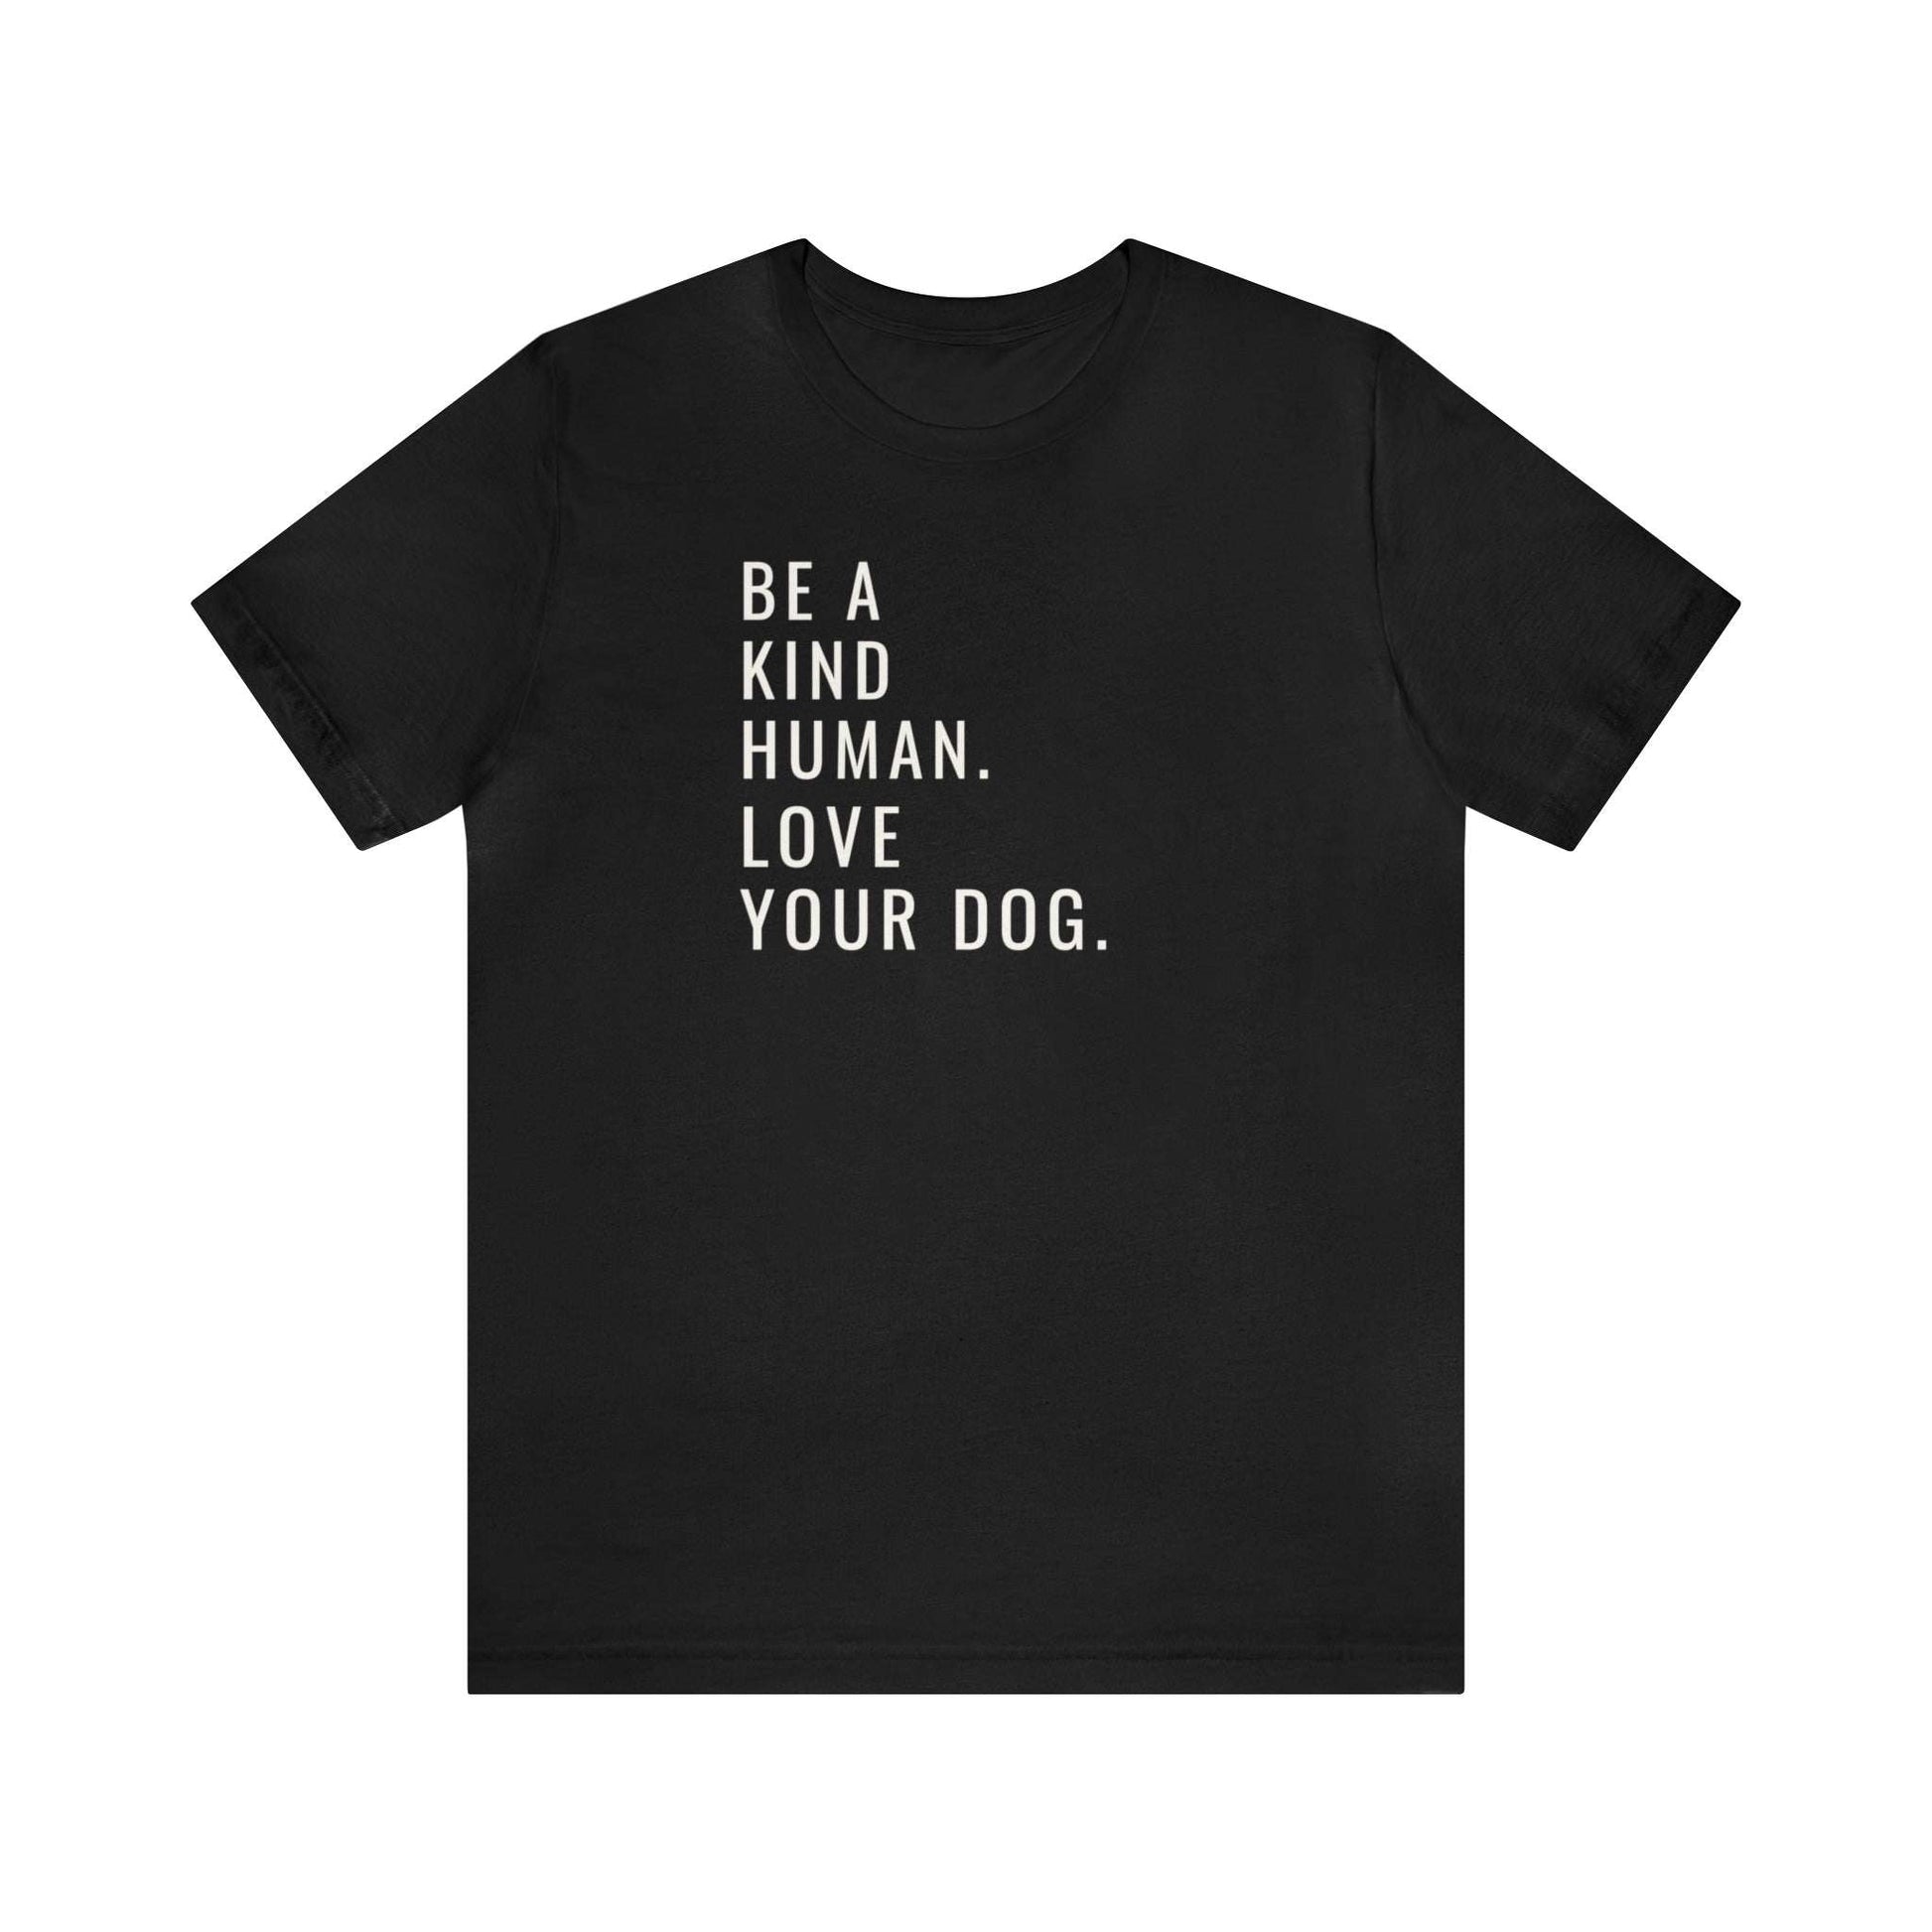 Fabulous Tee Shirts' ' Be A Kind Human Love Your Dog ' black t-shirt displayed to emphasize its superior quality.